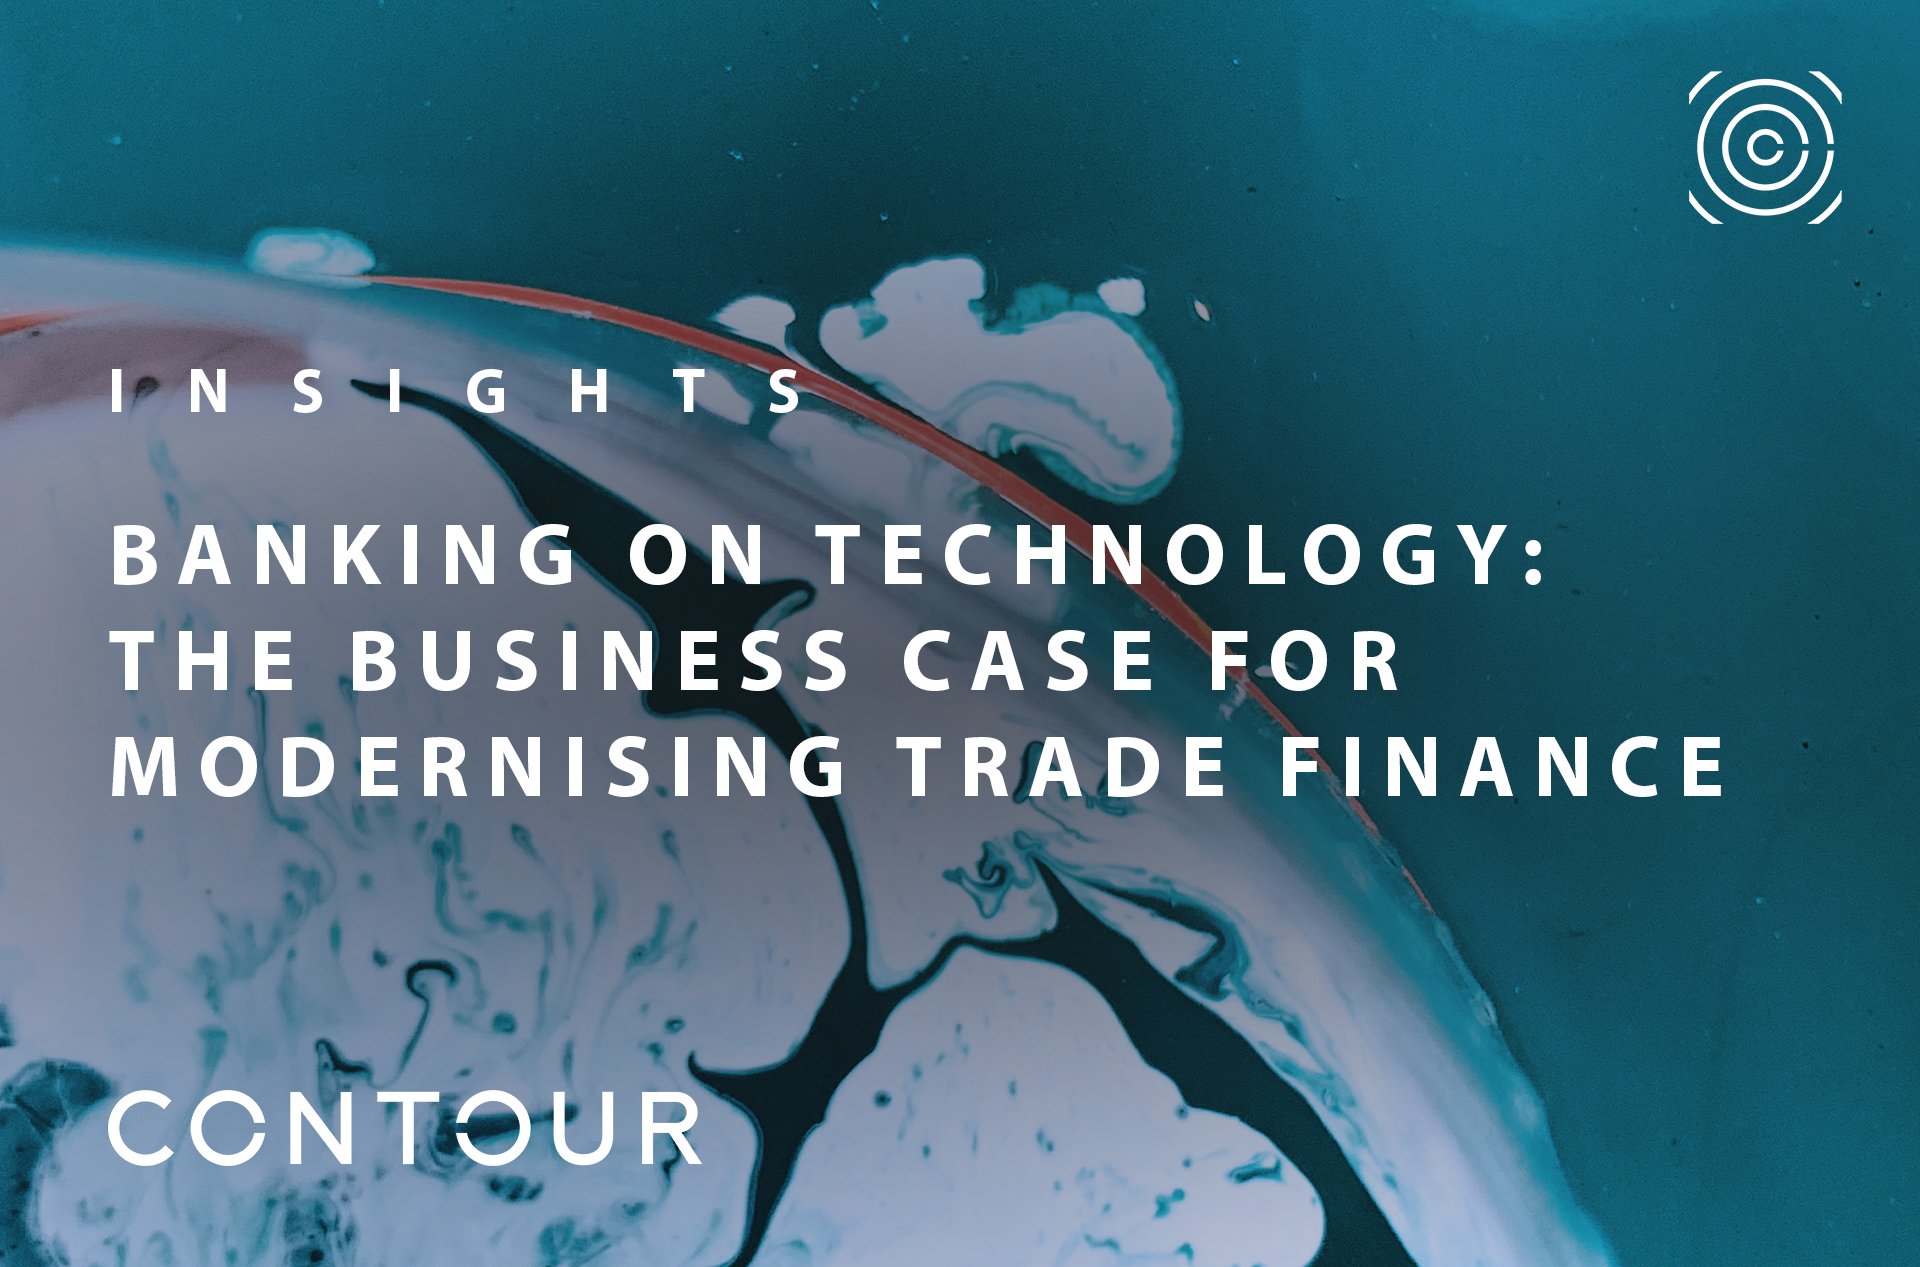 Banking on Technology: The business case for modernising trade finance